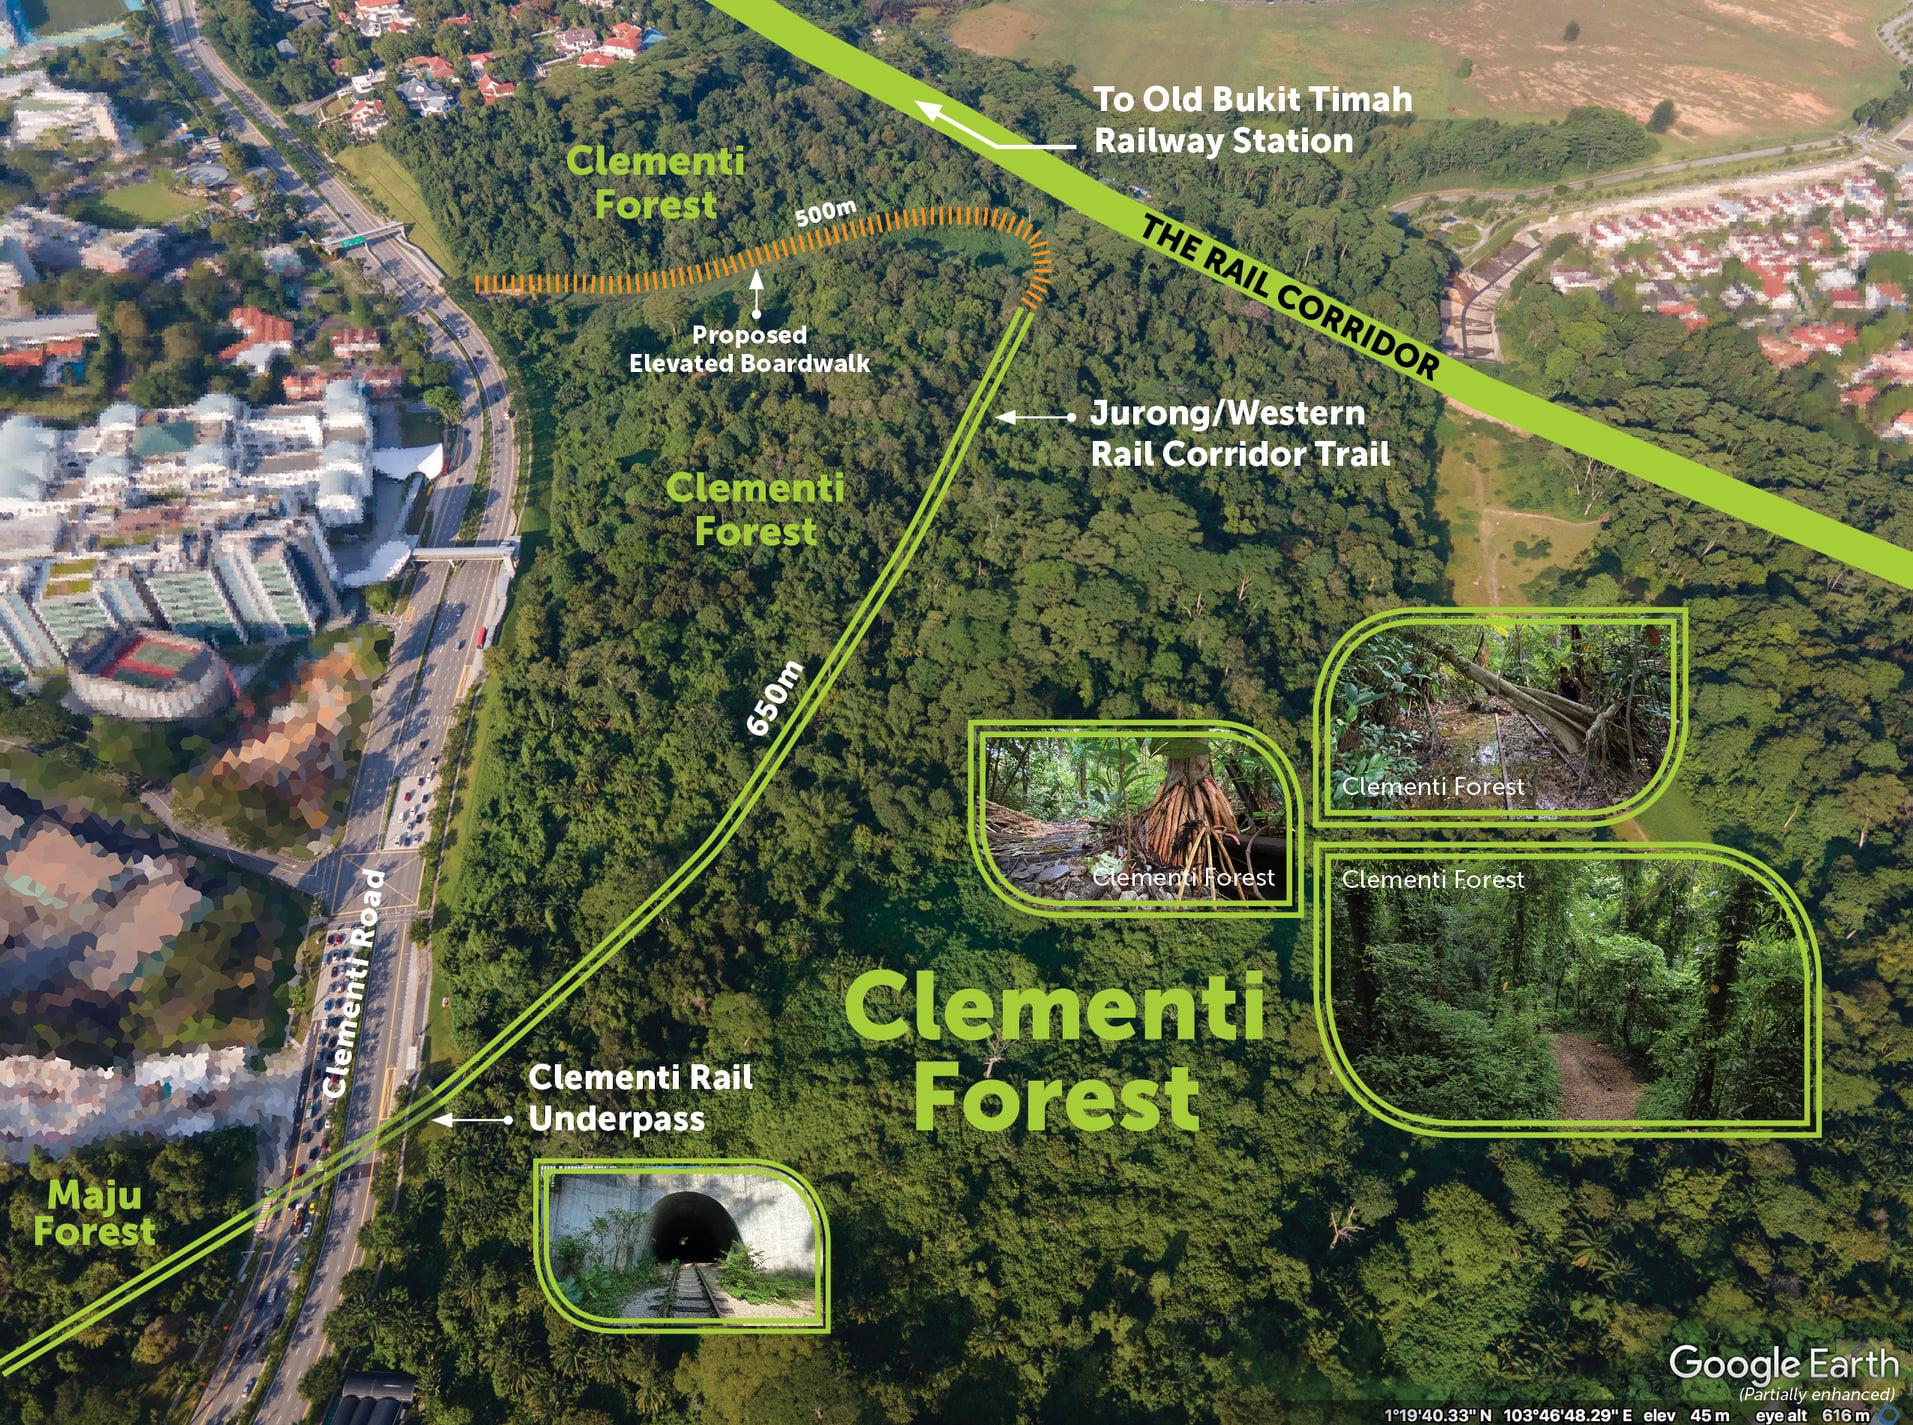 Clementi Forest proposal